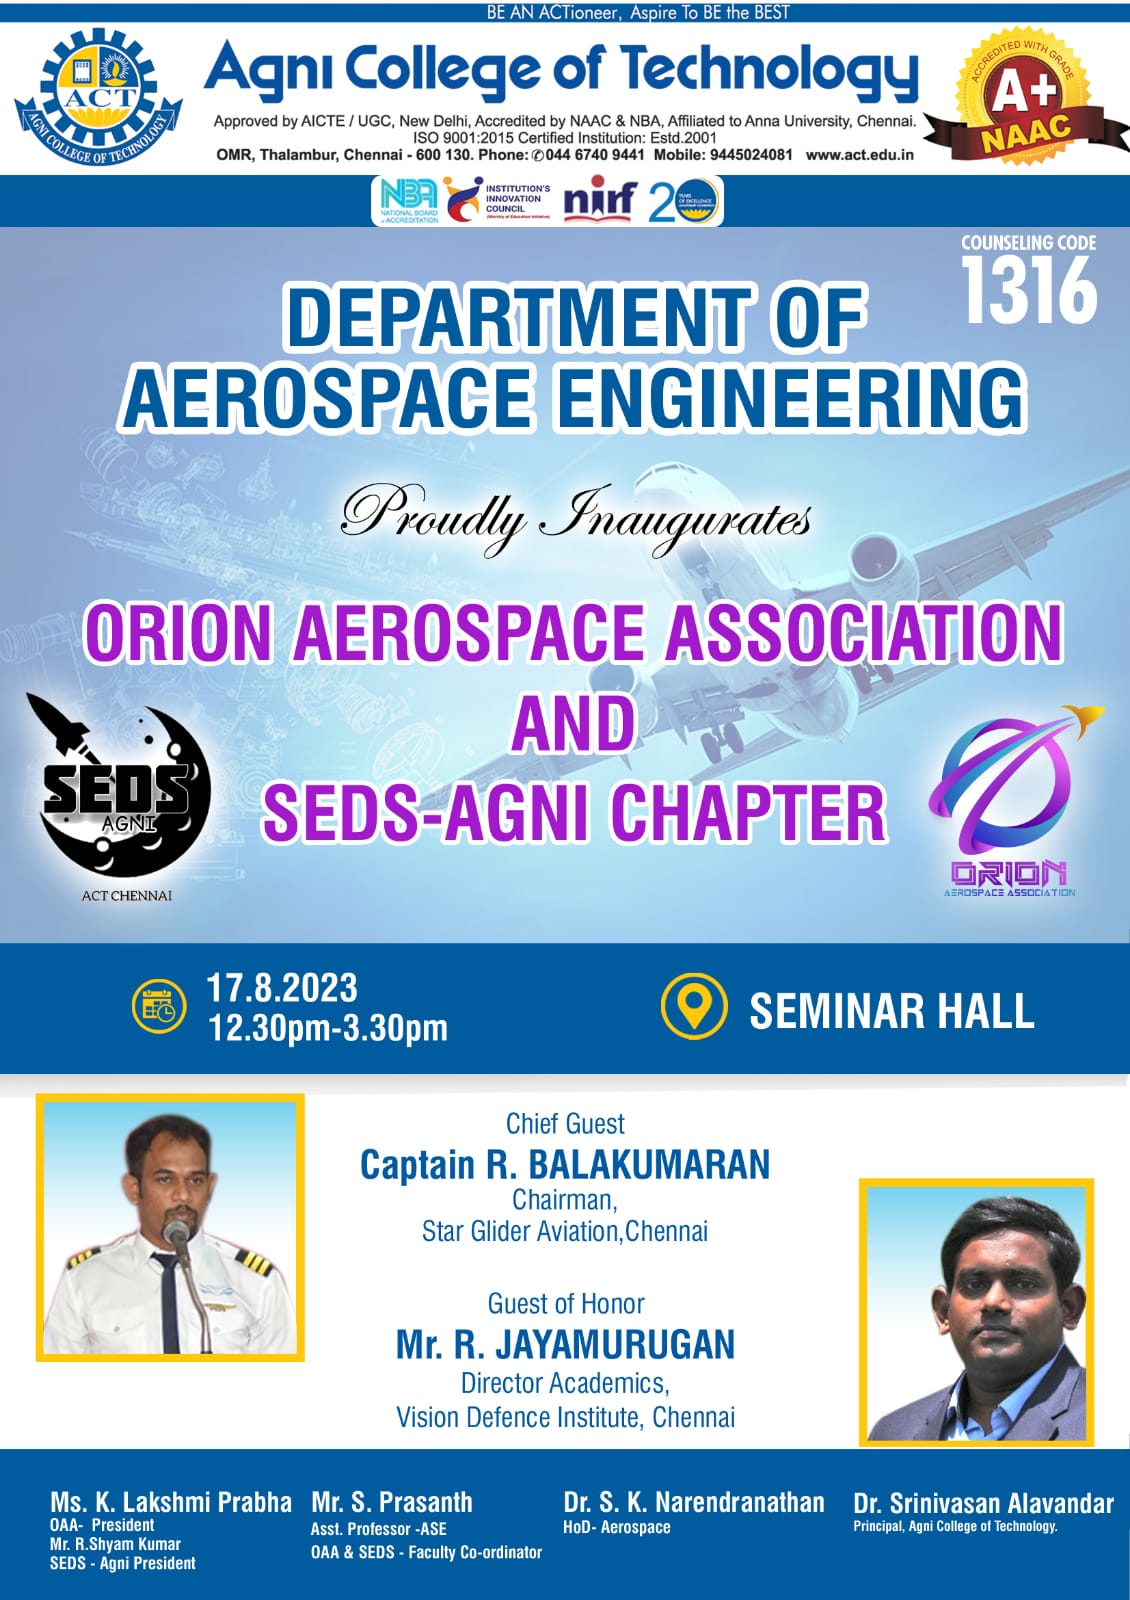 Inauguration of Orion Aerospace Association and SEDS-AGNI Chapter